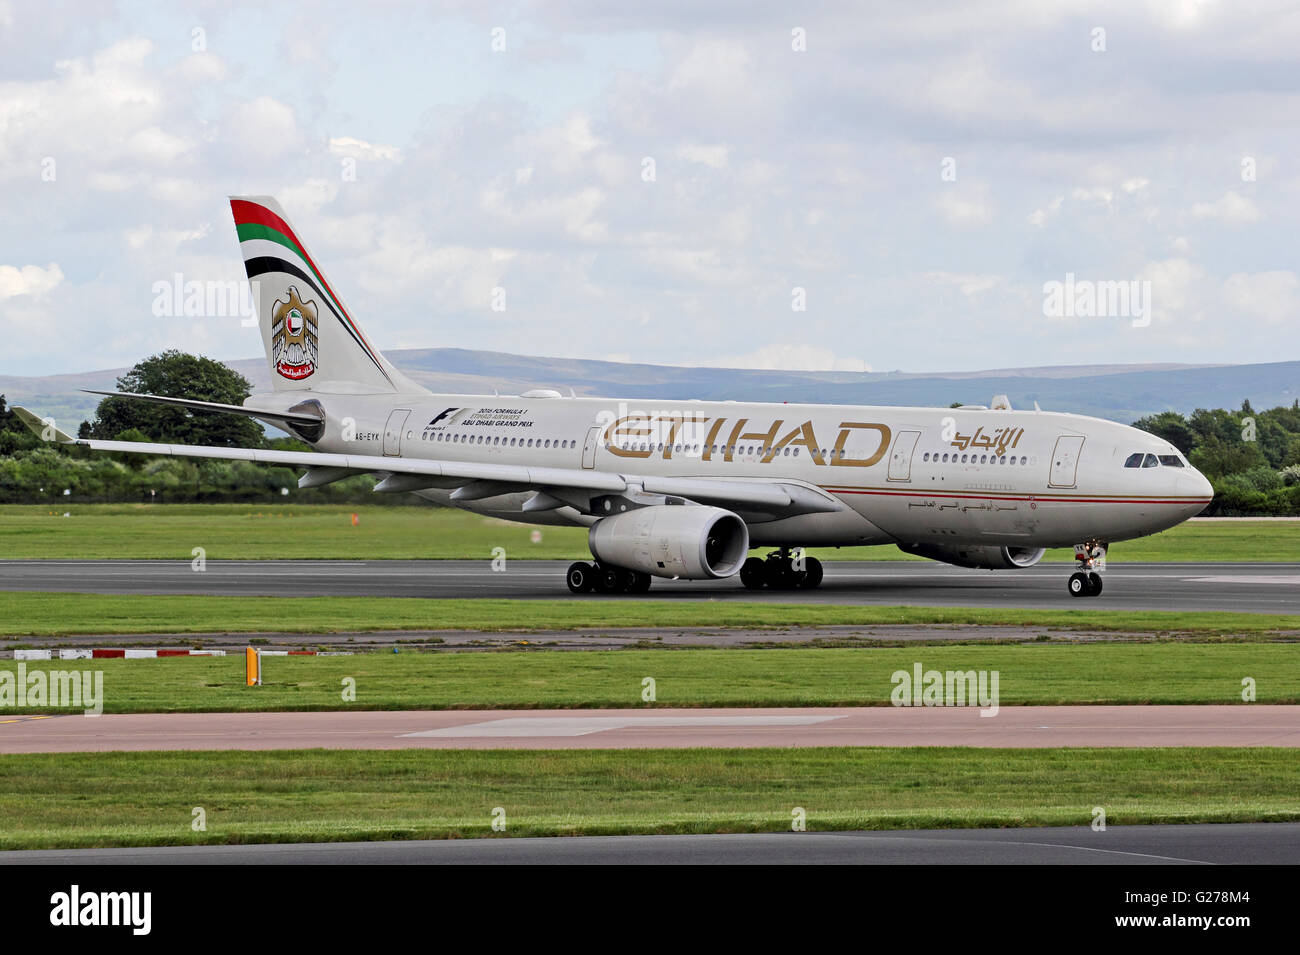 Etihad Airlines Airbus A330-243 airliner taxiing at Manchester International Airport Stock Photo